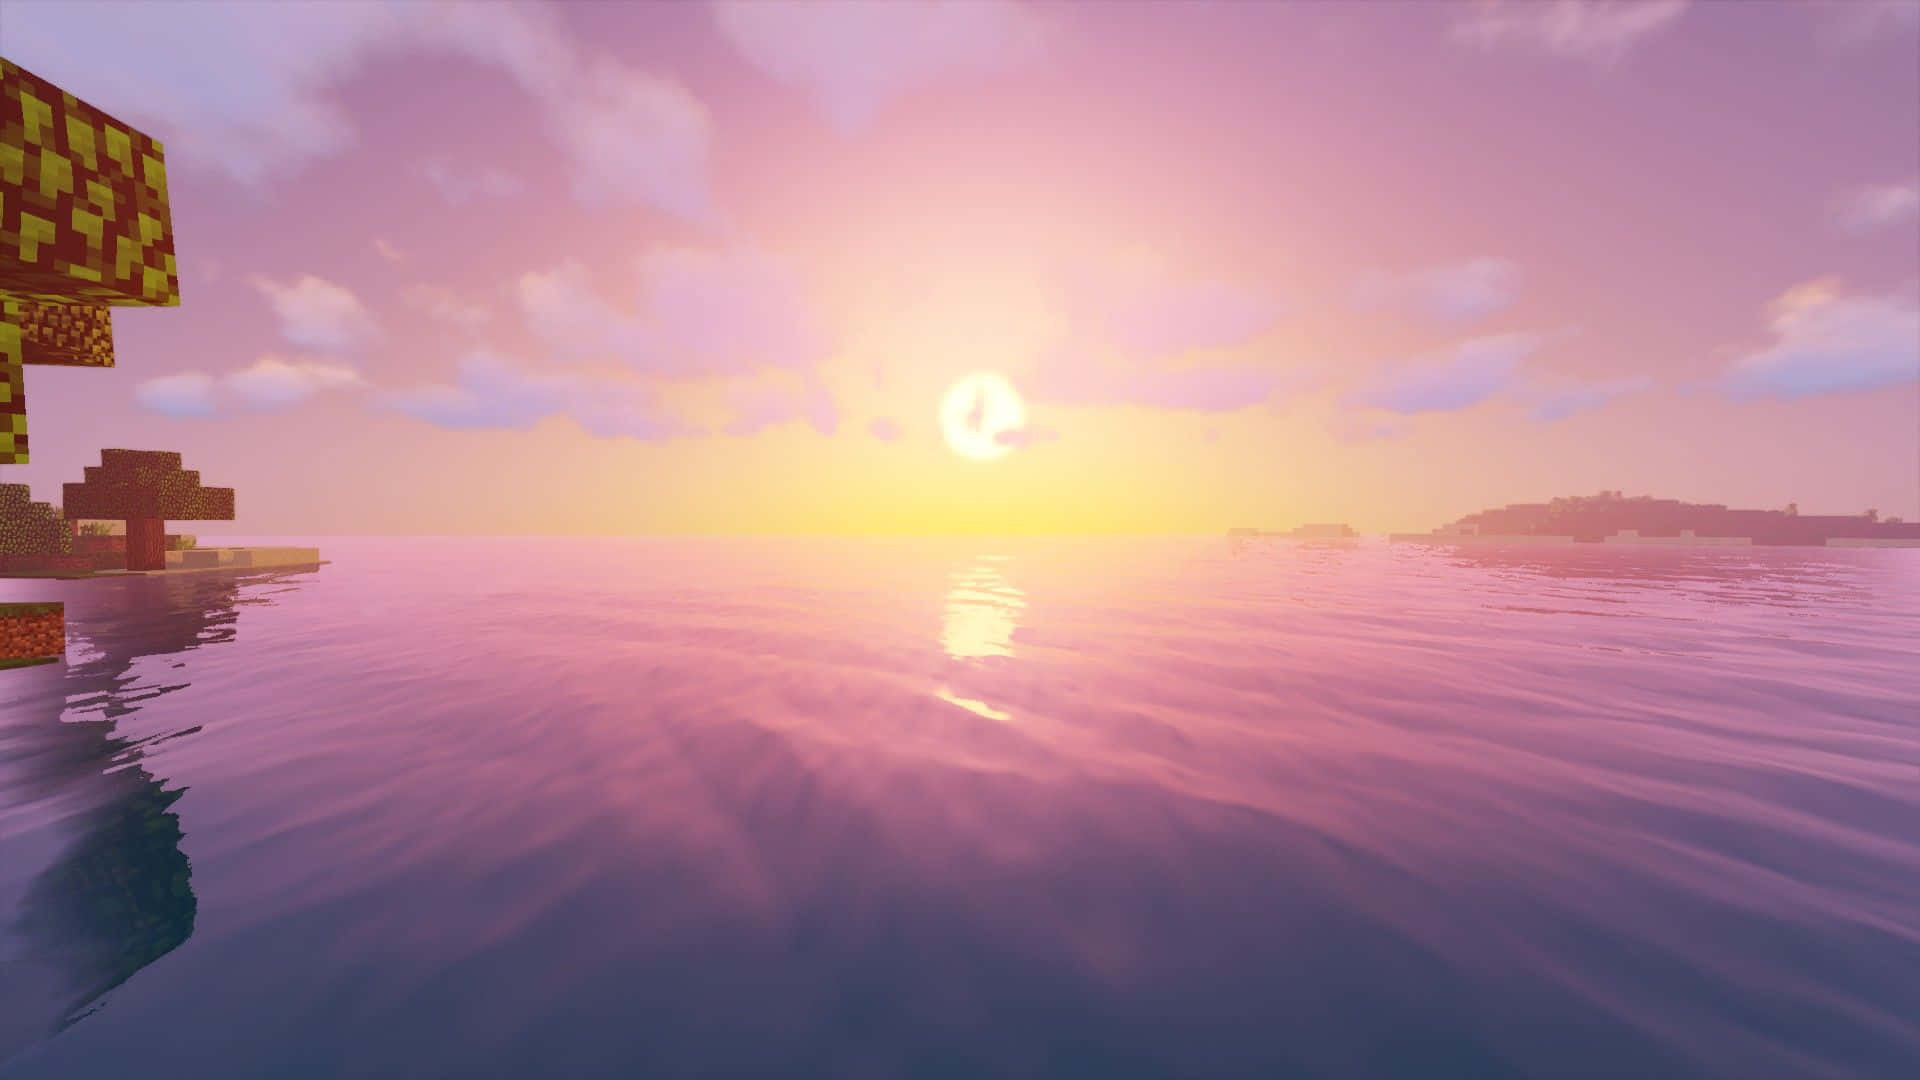 A peaceful, vibrant sunset moment in the world of Minecraft Wallpaper